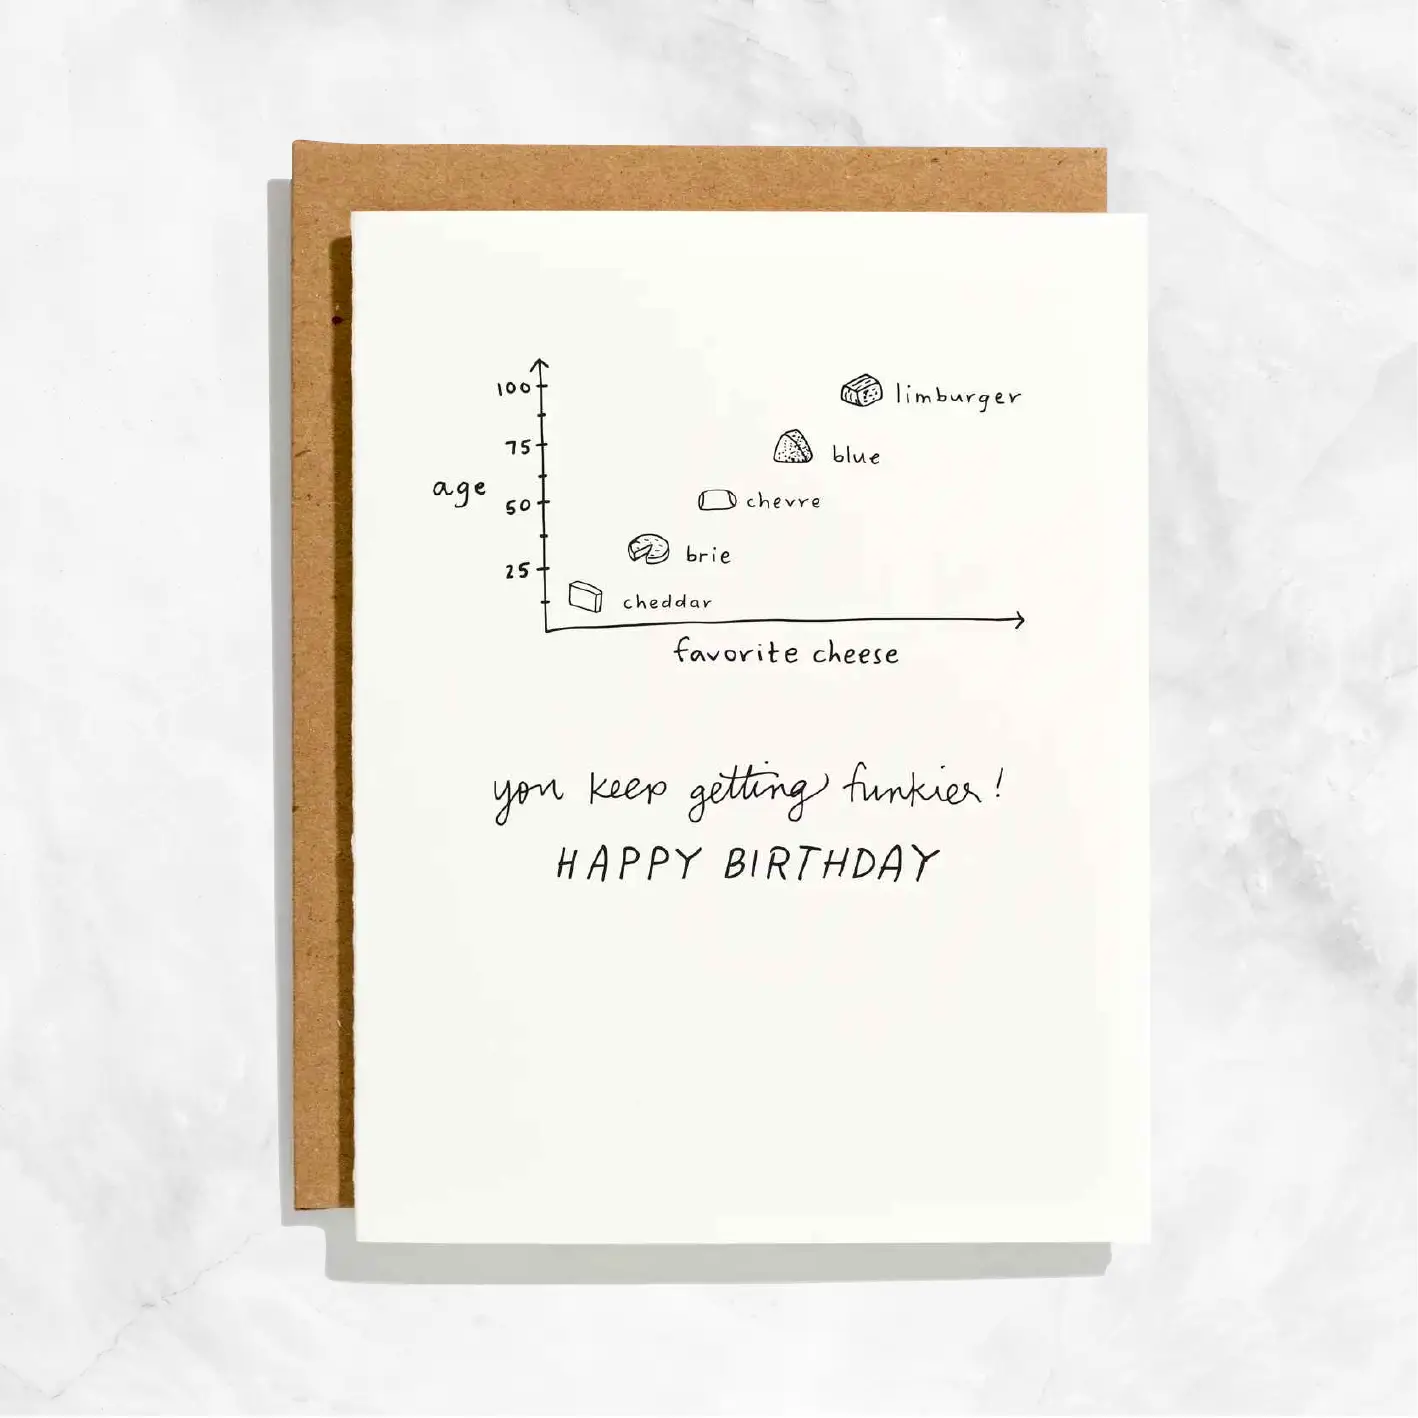 Favorite Cheese Birthday Card Delivery